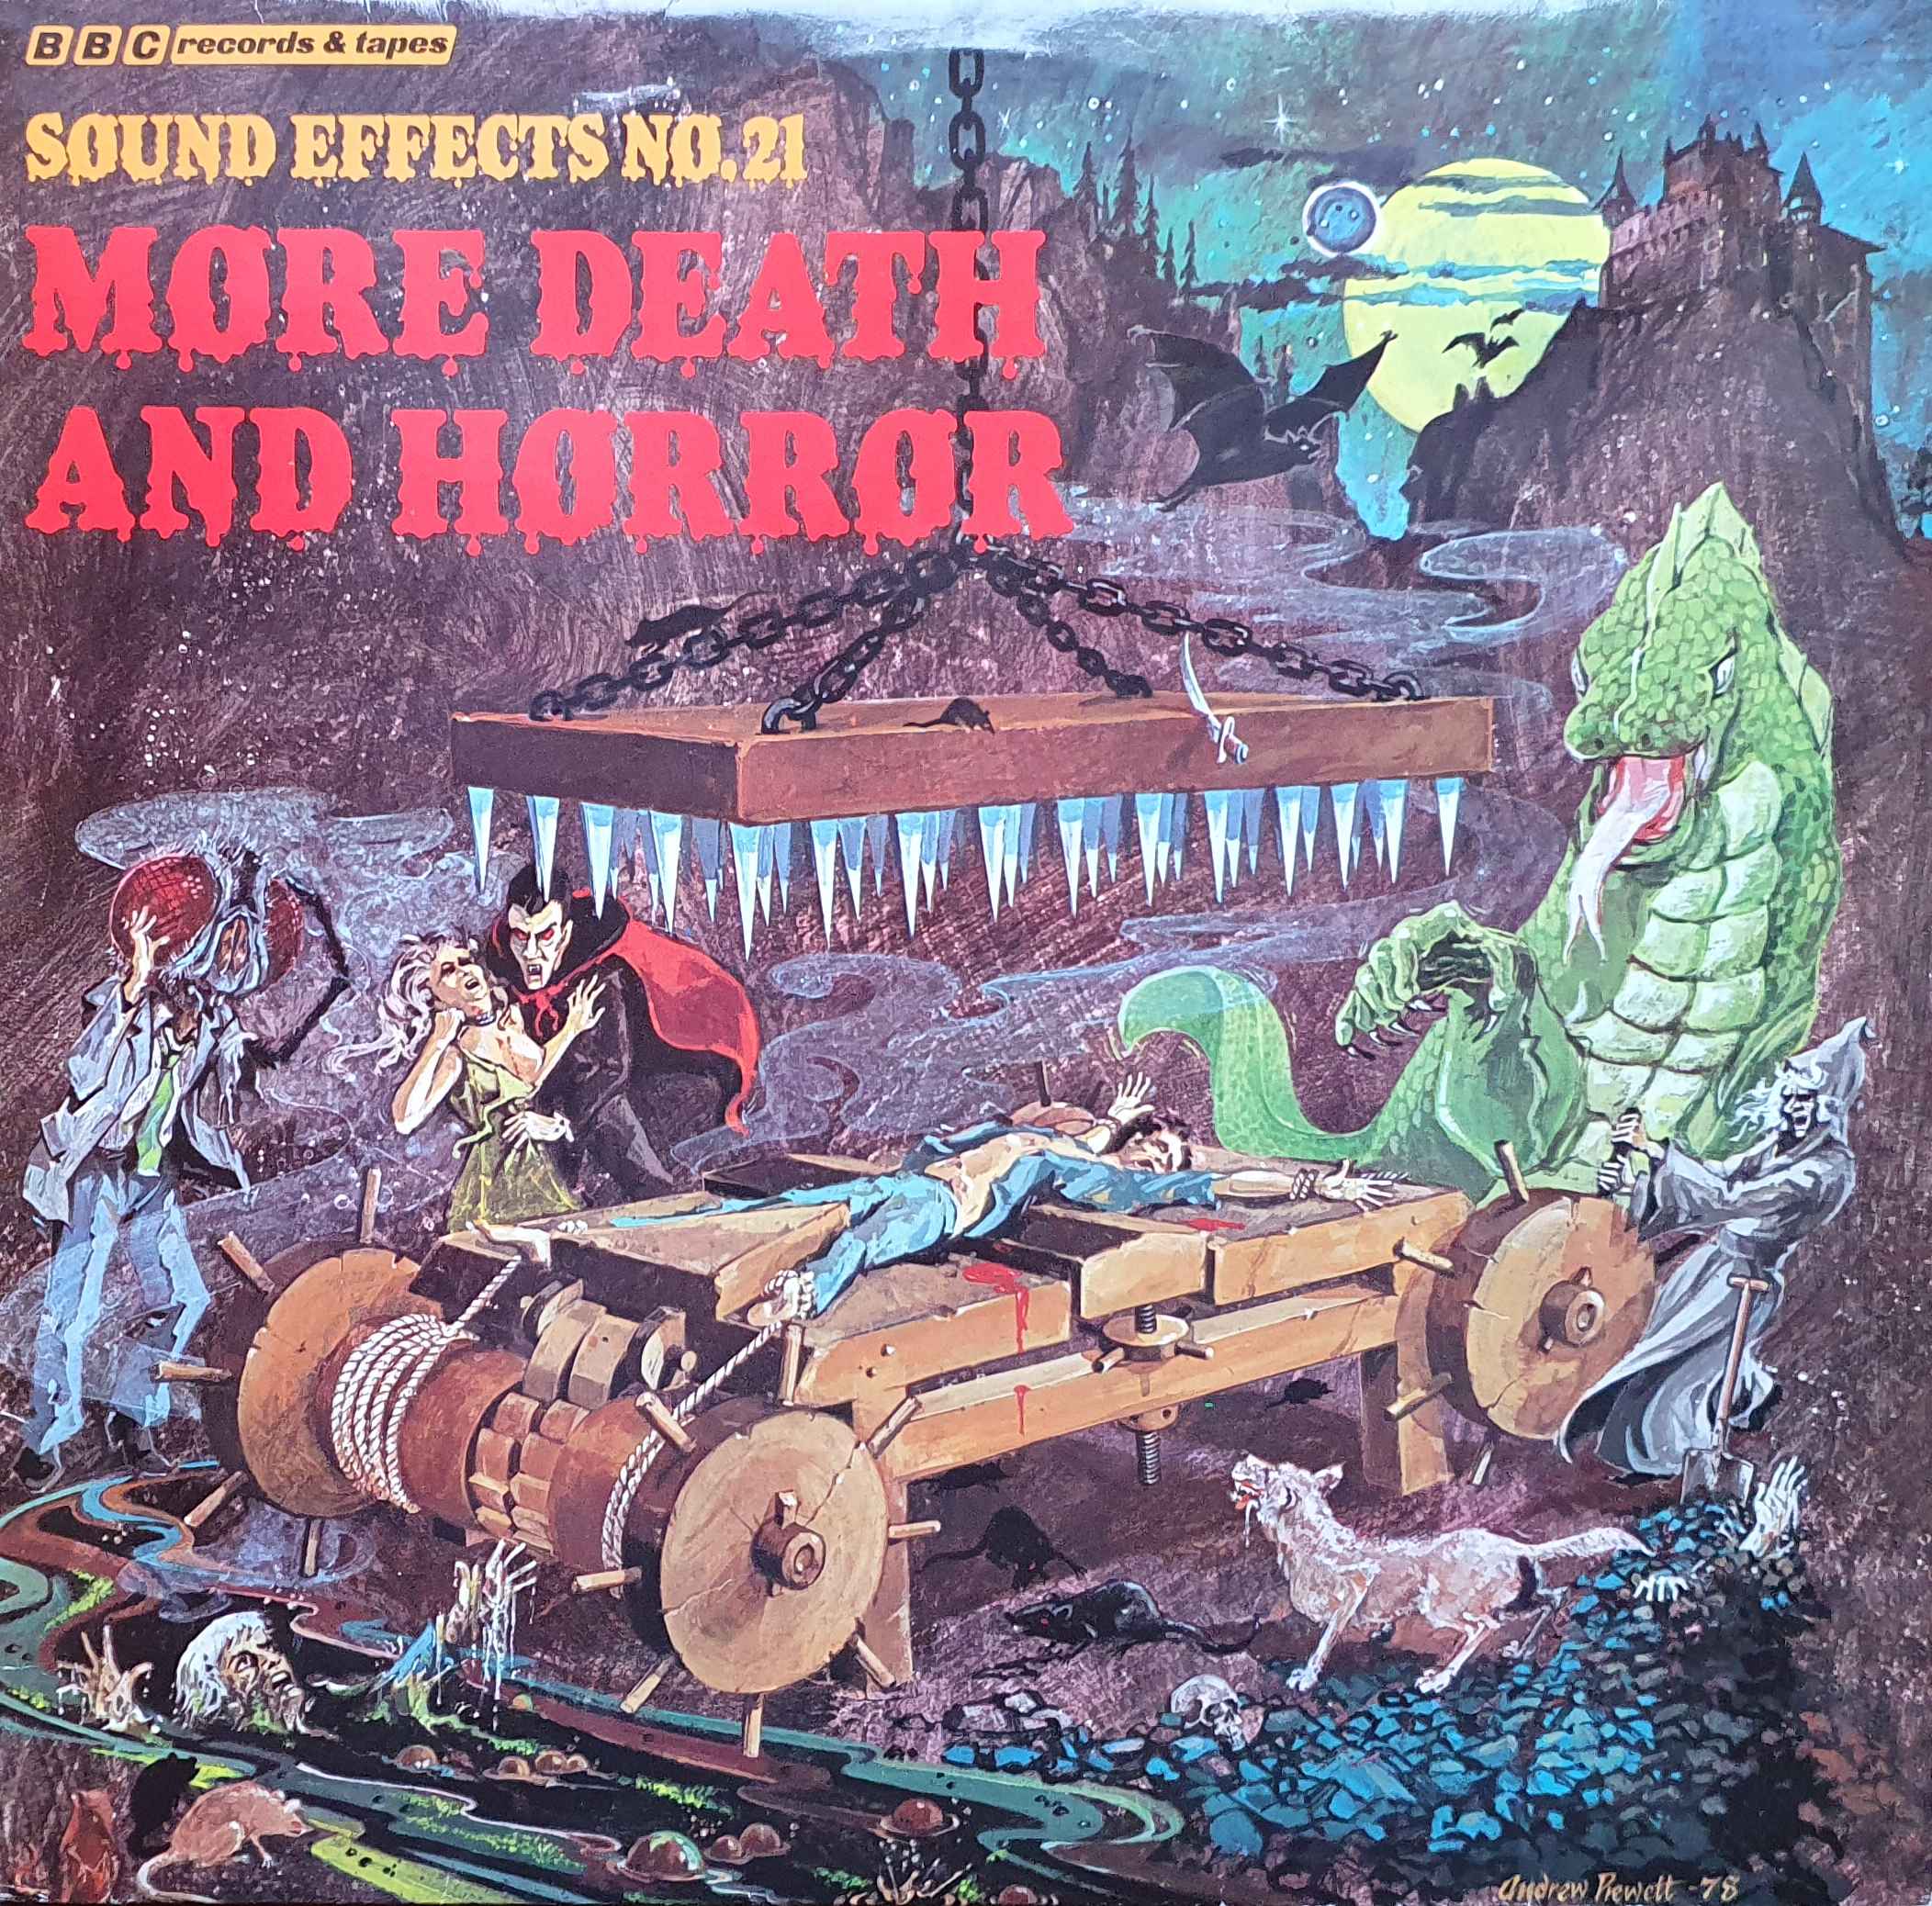 Picture of INT 128.006 More death and horror sound effects by artist Mike Harding / Peter Harwood from the BBC albums - Records and Tapes library